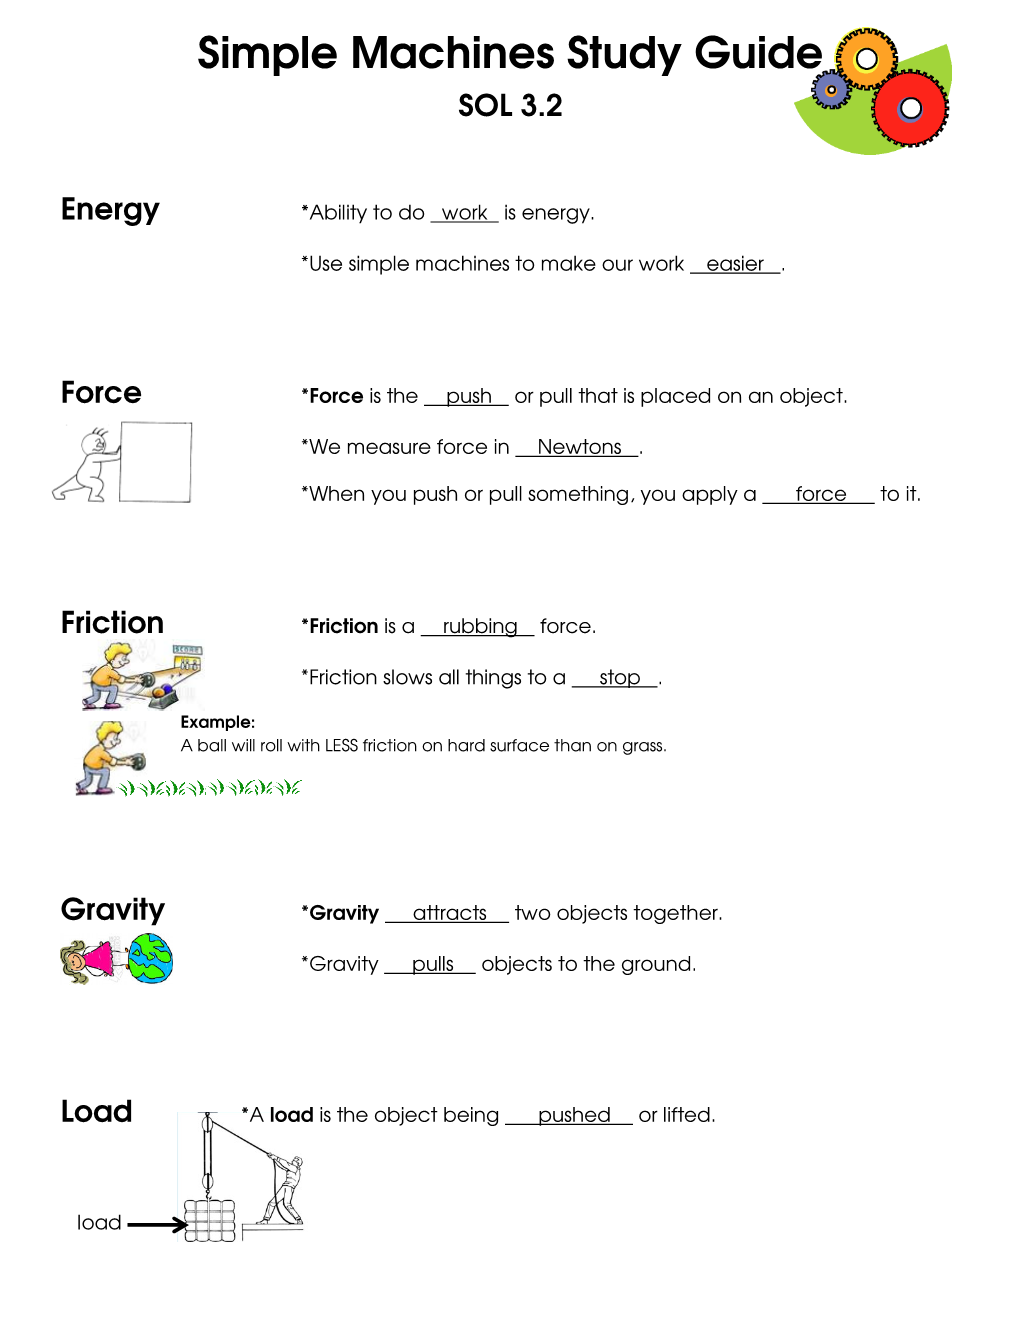 Simple Machines Study Guide SOL 3.2